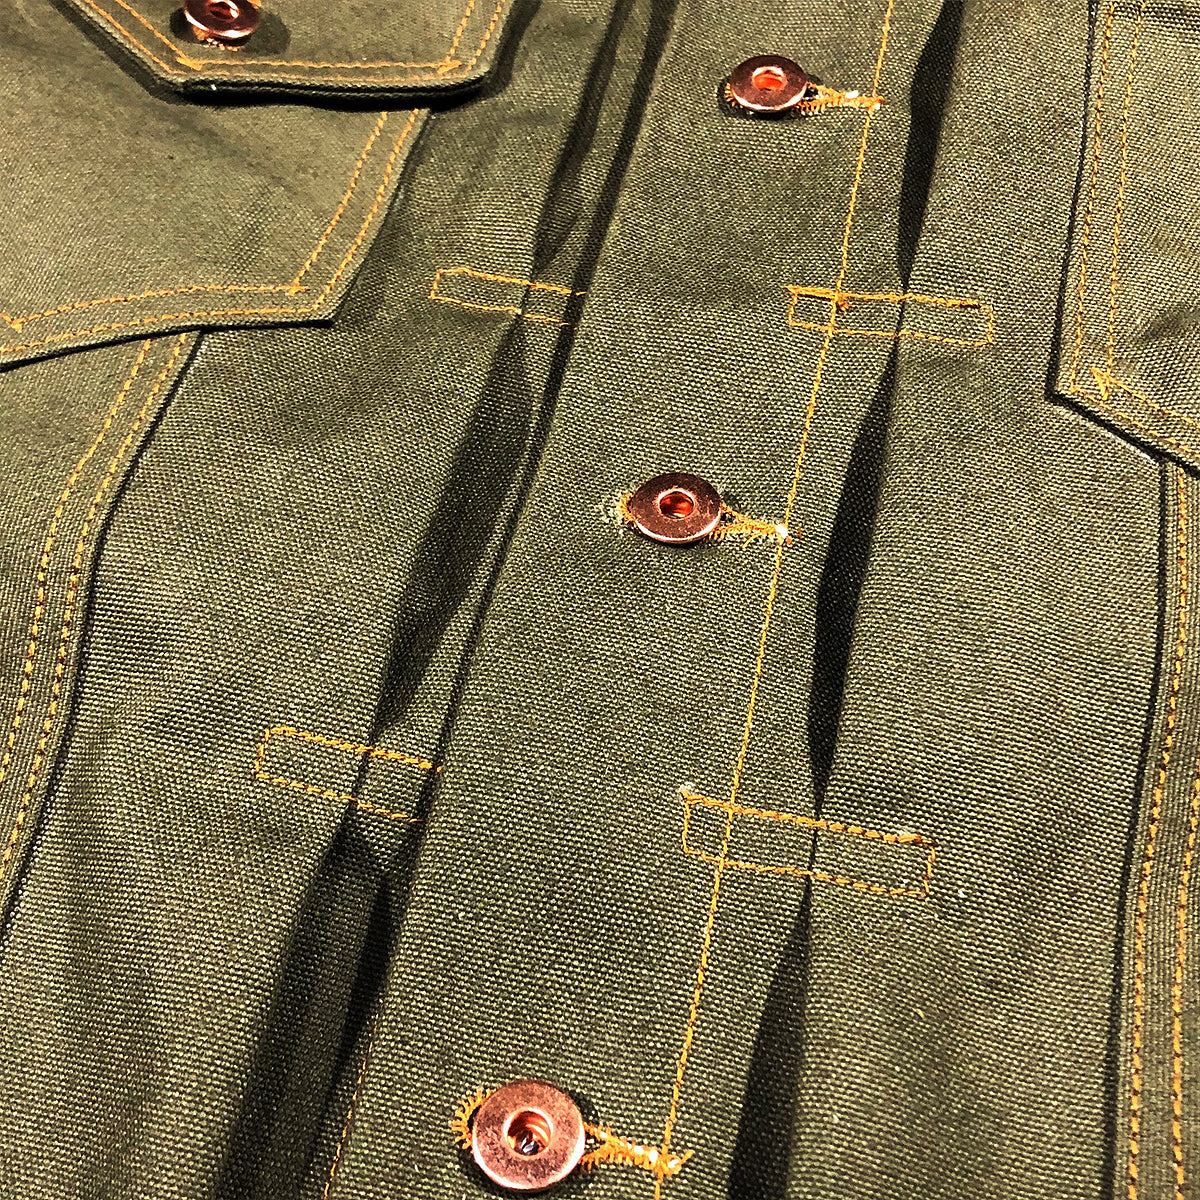 18oz Green Vintage Selvage Duck Canvas Field Hand Jacket